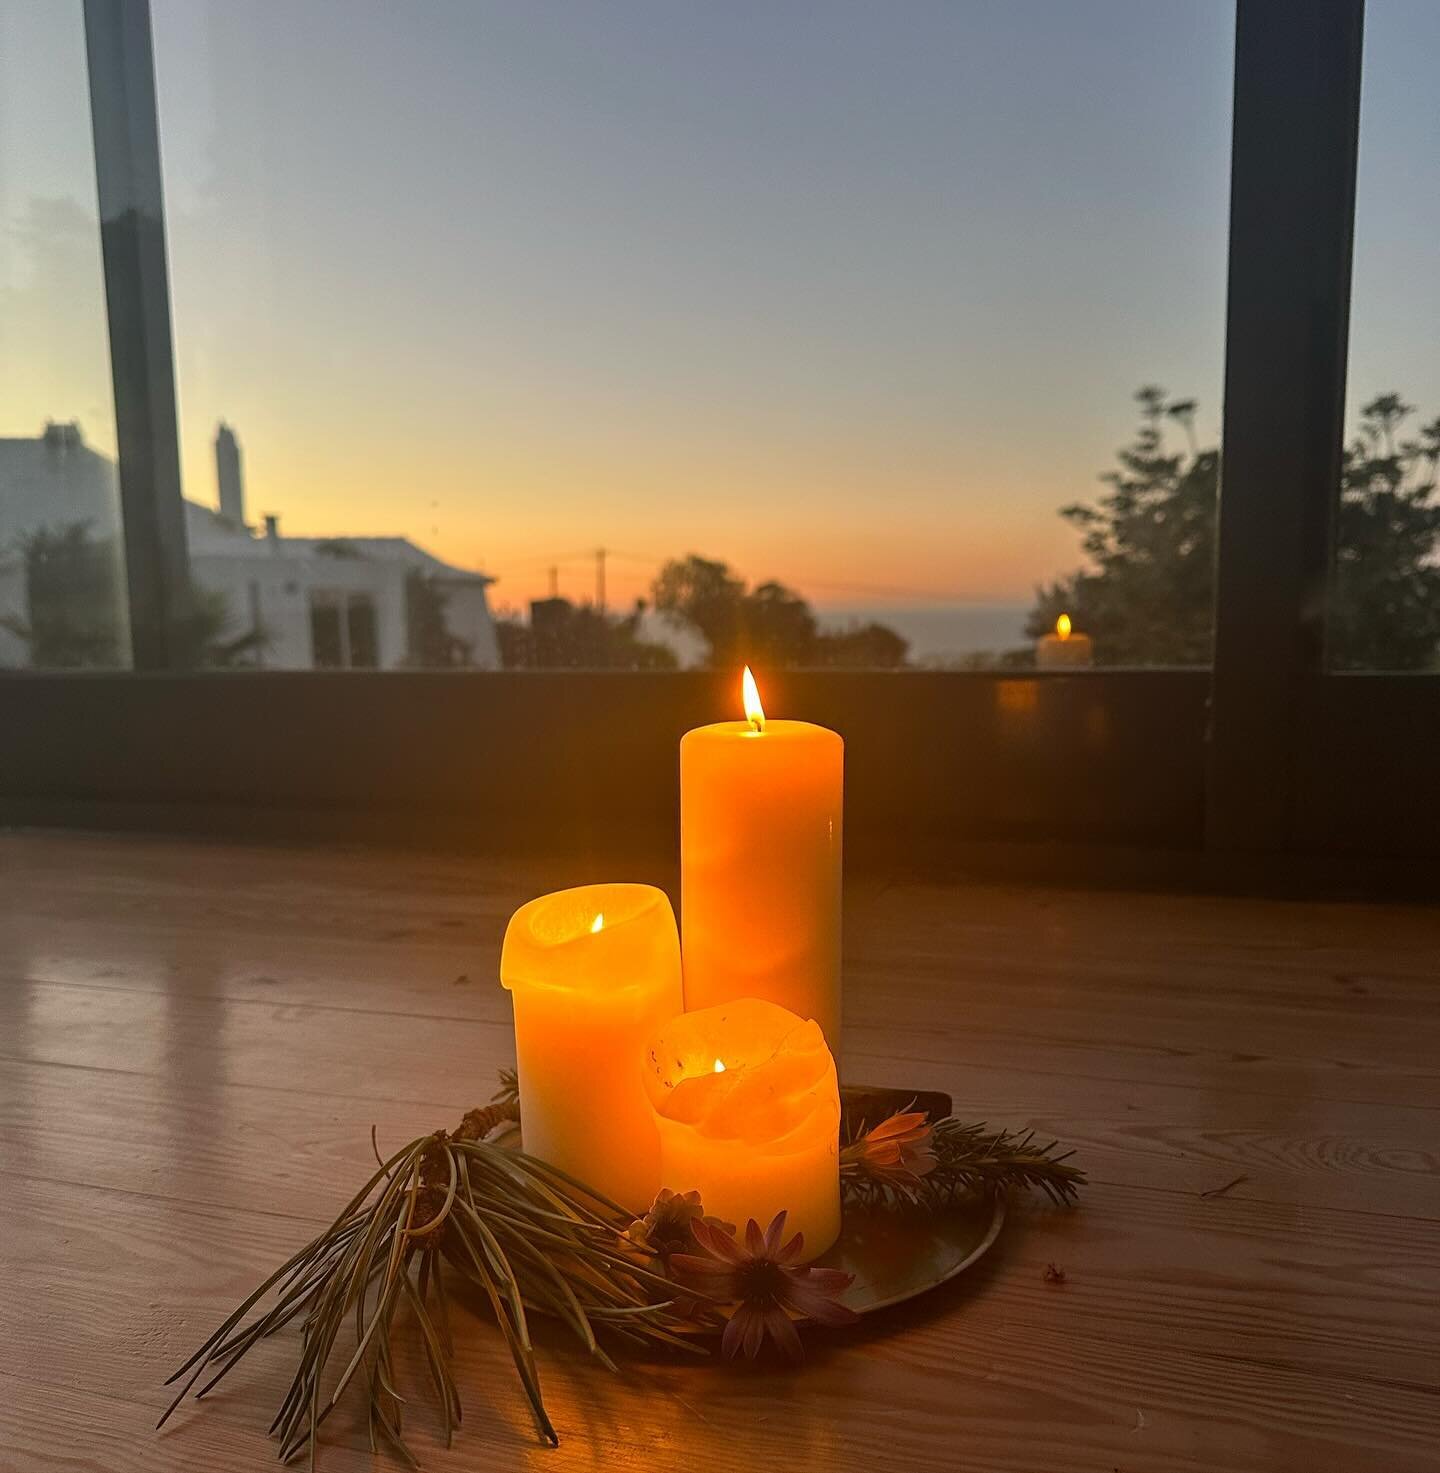 Sacred Pause. Welcoming the Solstice and moving slowly back to the light. 

During this time of so much conflict, pressure and tension in the world and in our surroundings.. I hope you find the time to reflect, with gratitude and a clear mind to not 